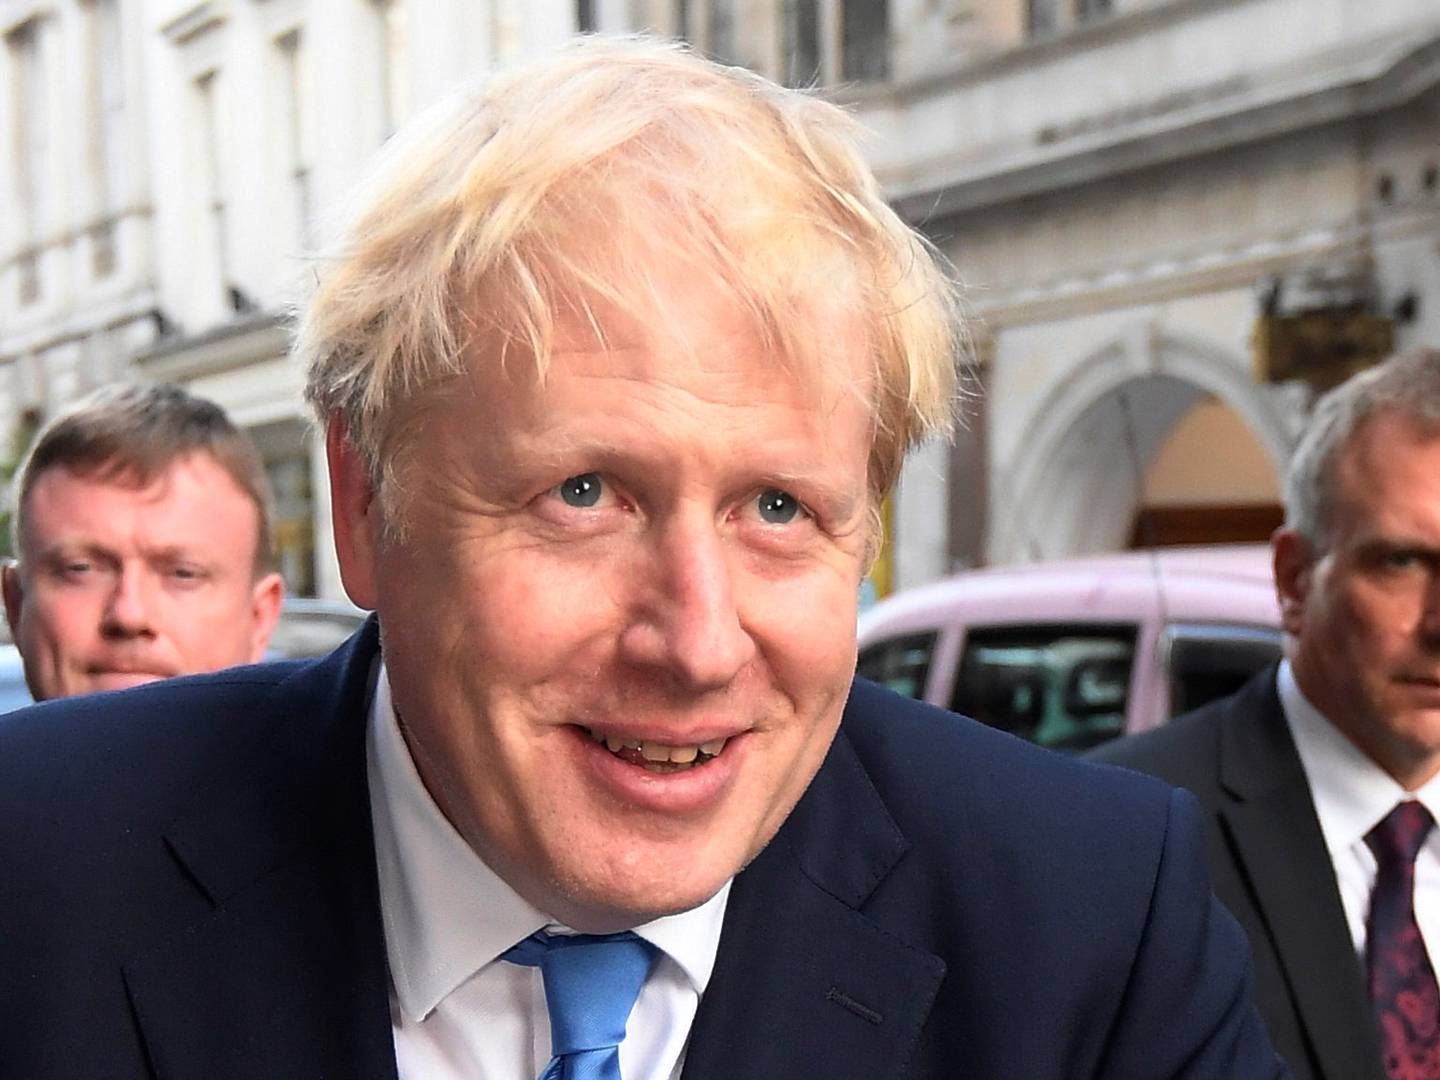 Yesterday, Boris Johnson was chosen as the new leader of the Conservative Party. This appointment automatically made him Prime Minister. | Photo: Toby Melville/REUTERS / X90004